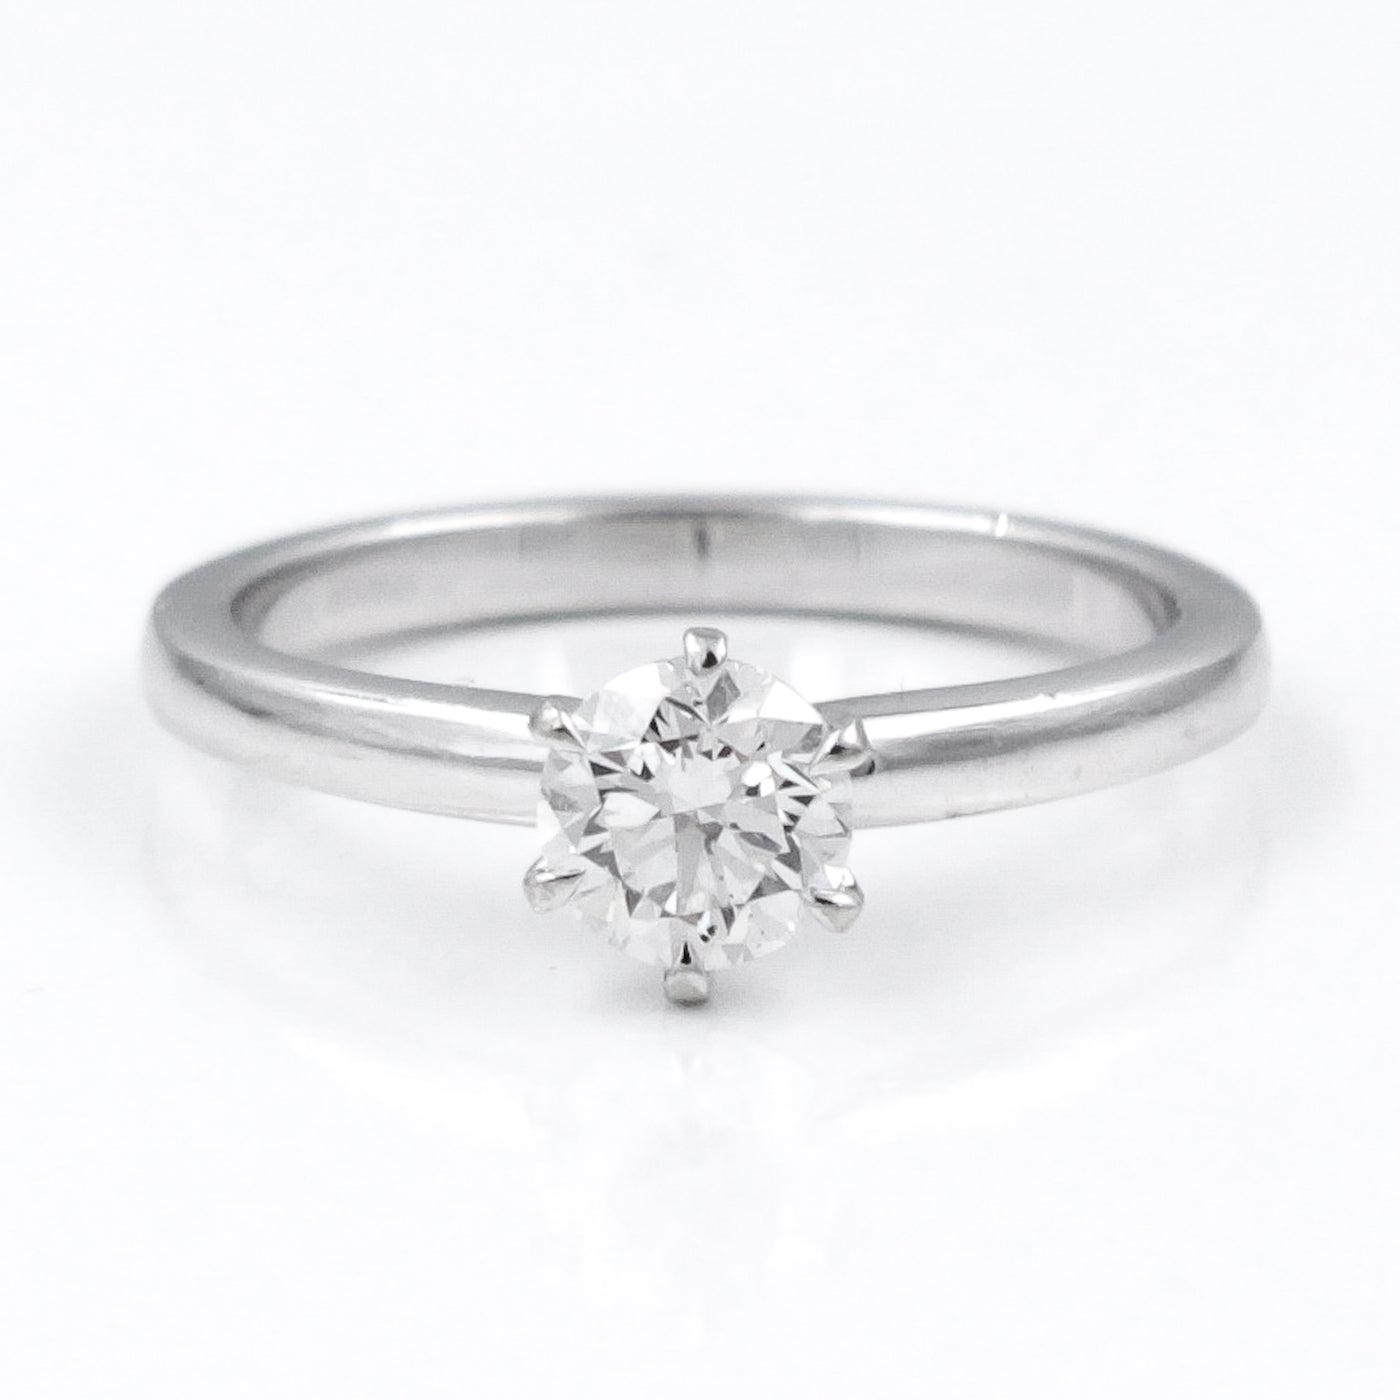 14K White Gold 6 Prong Diamond Solitaire Engagement Ring